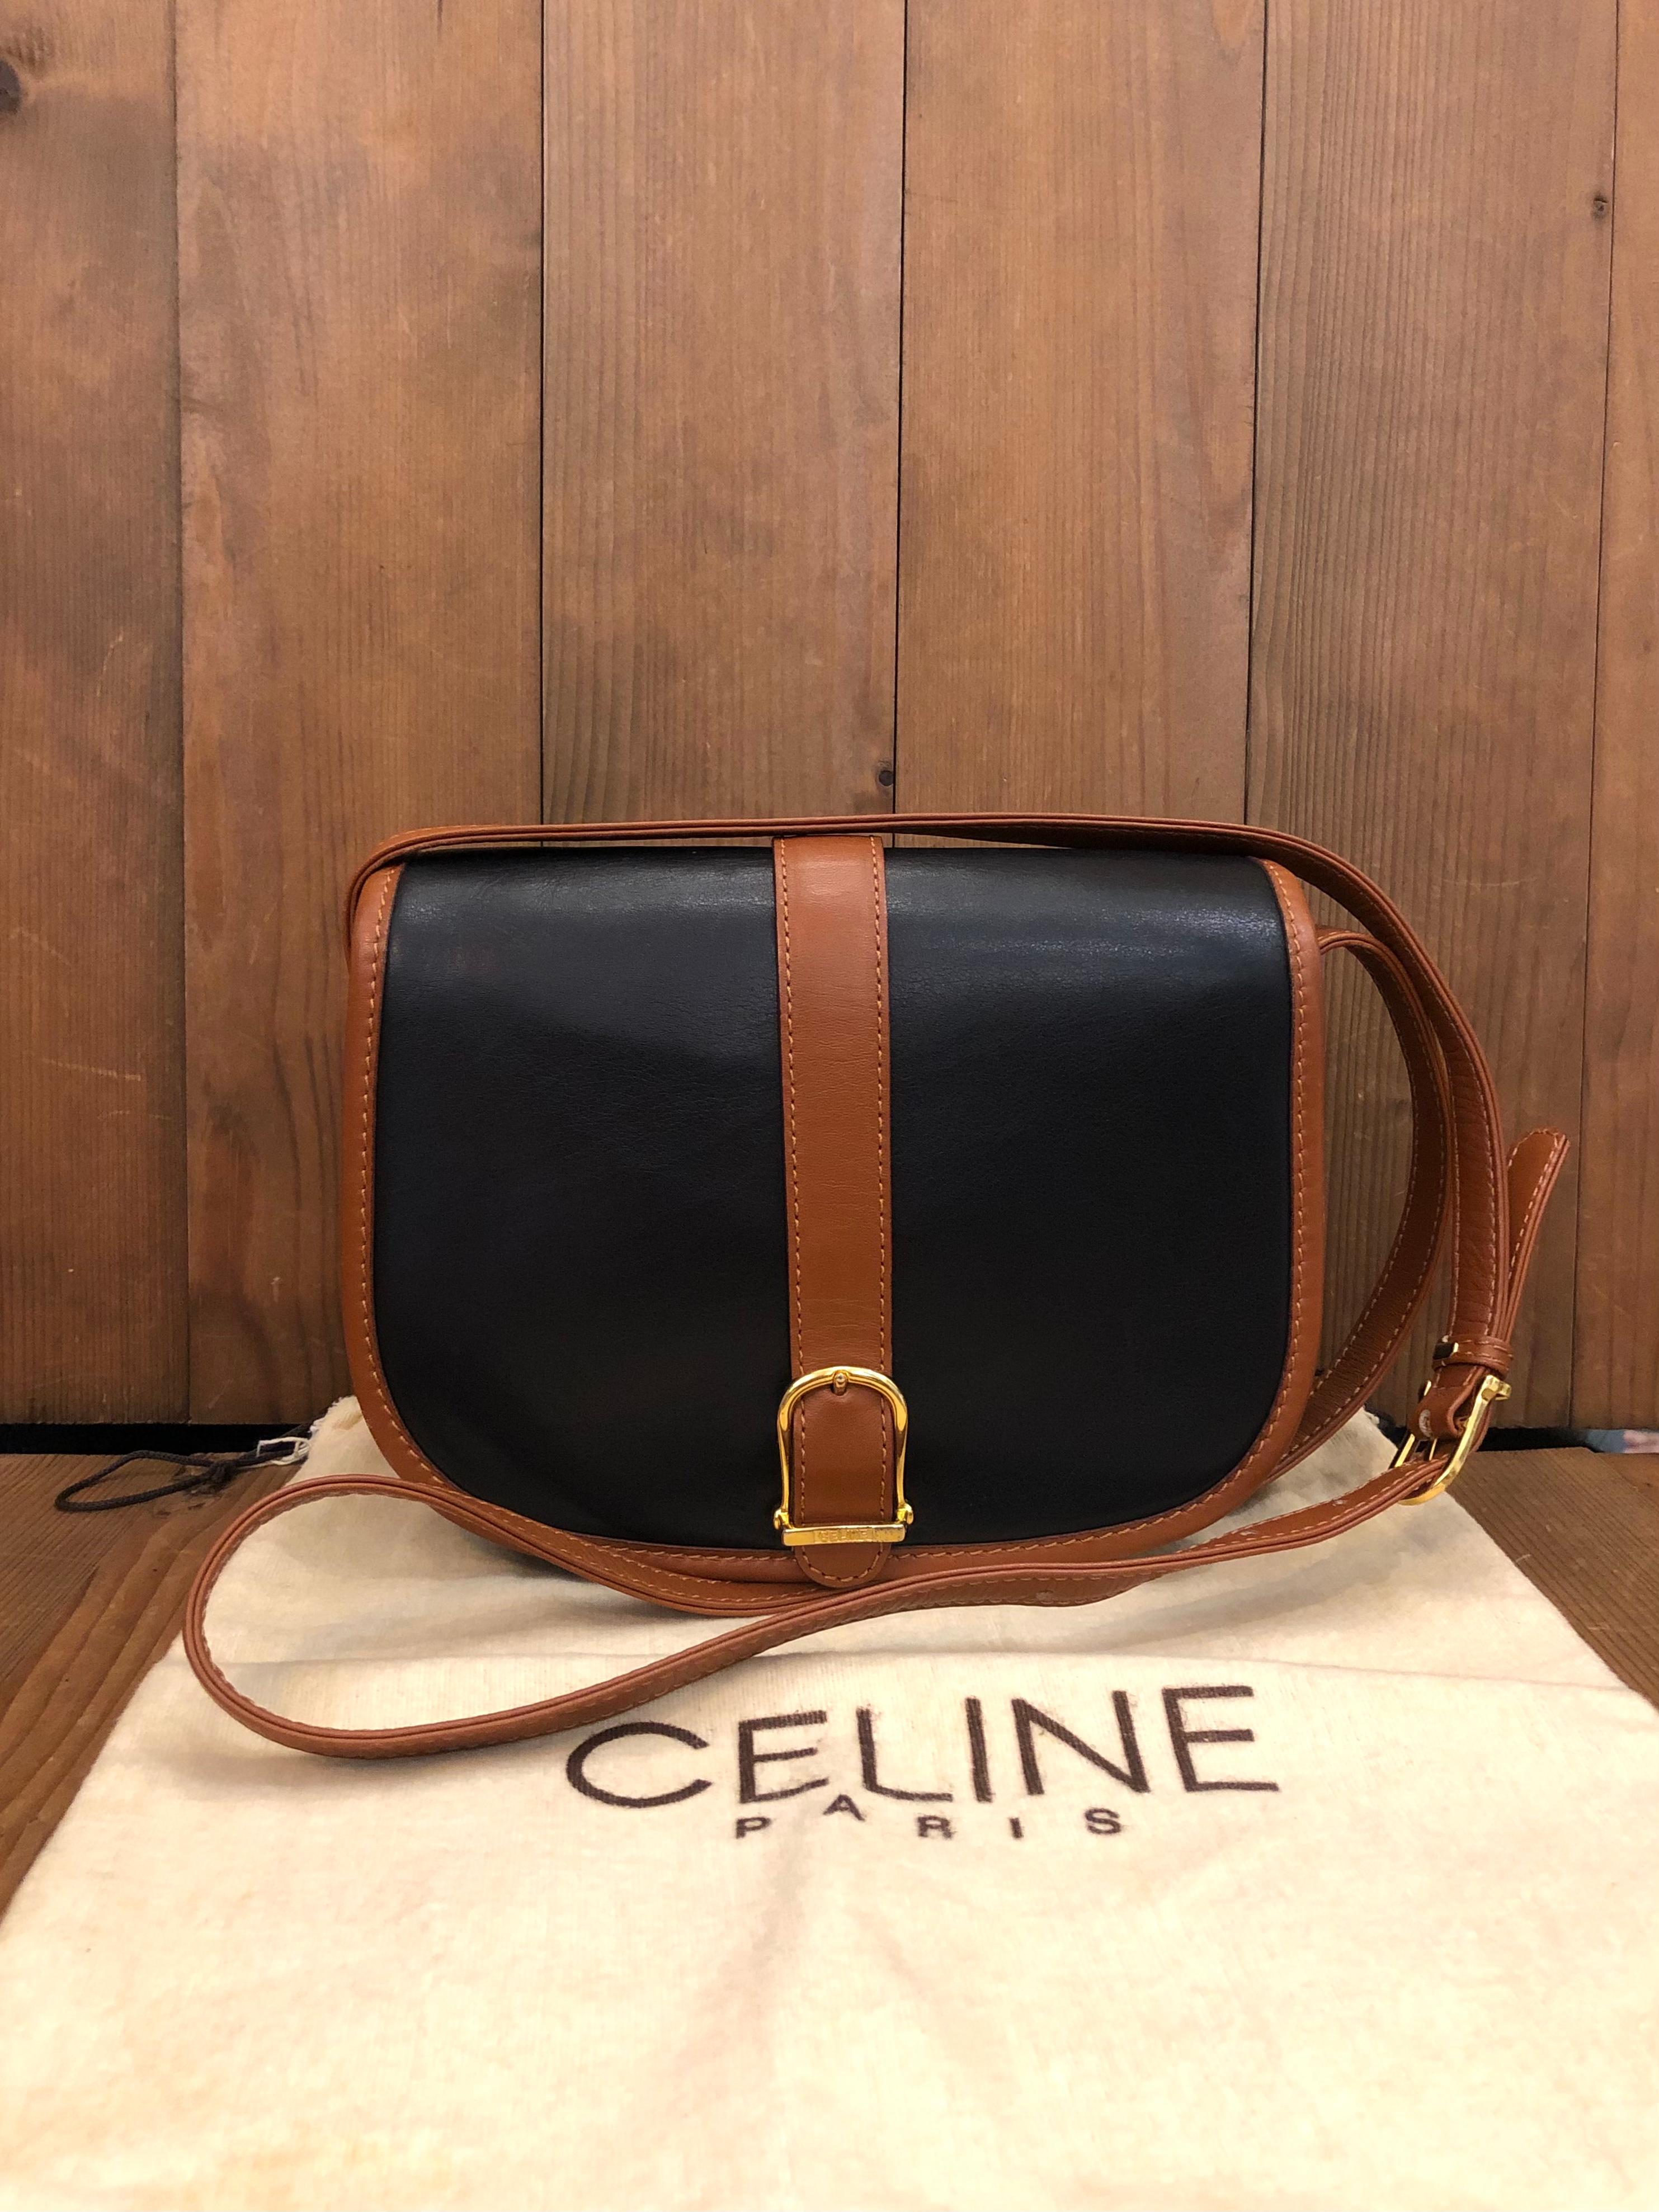 Vintage CELINE crossbody box bag in soft black leather trimmed with brown leather featuring an adjustable strap with one interior zip pocket and one back exterior open pocket. Front flap magnetic snap closure. Measures approximately  8 x 6 x 2